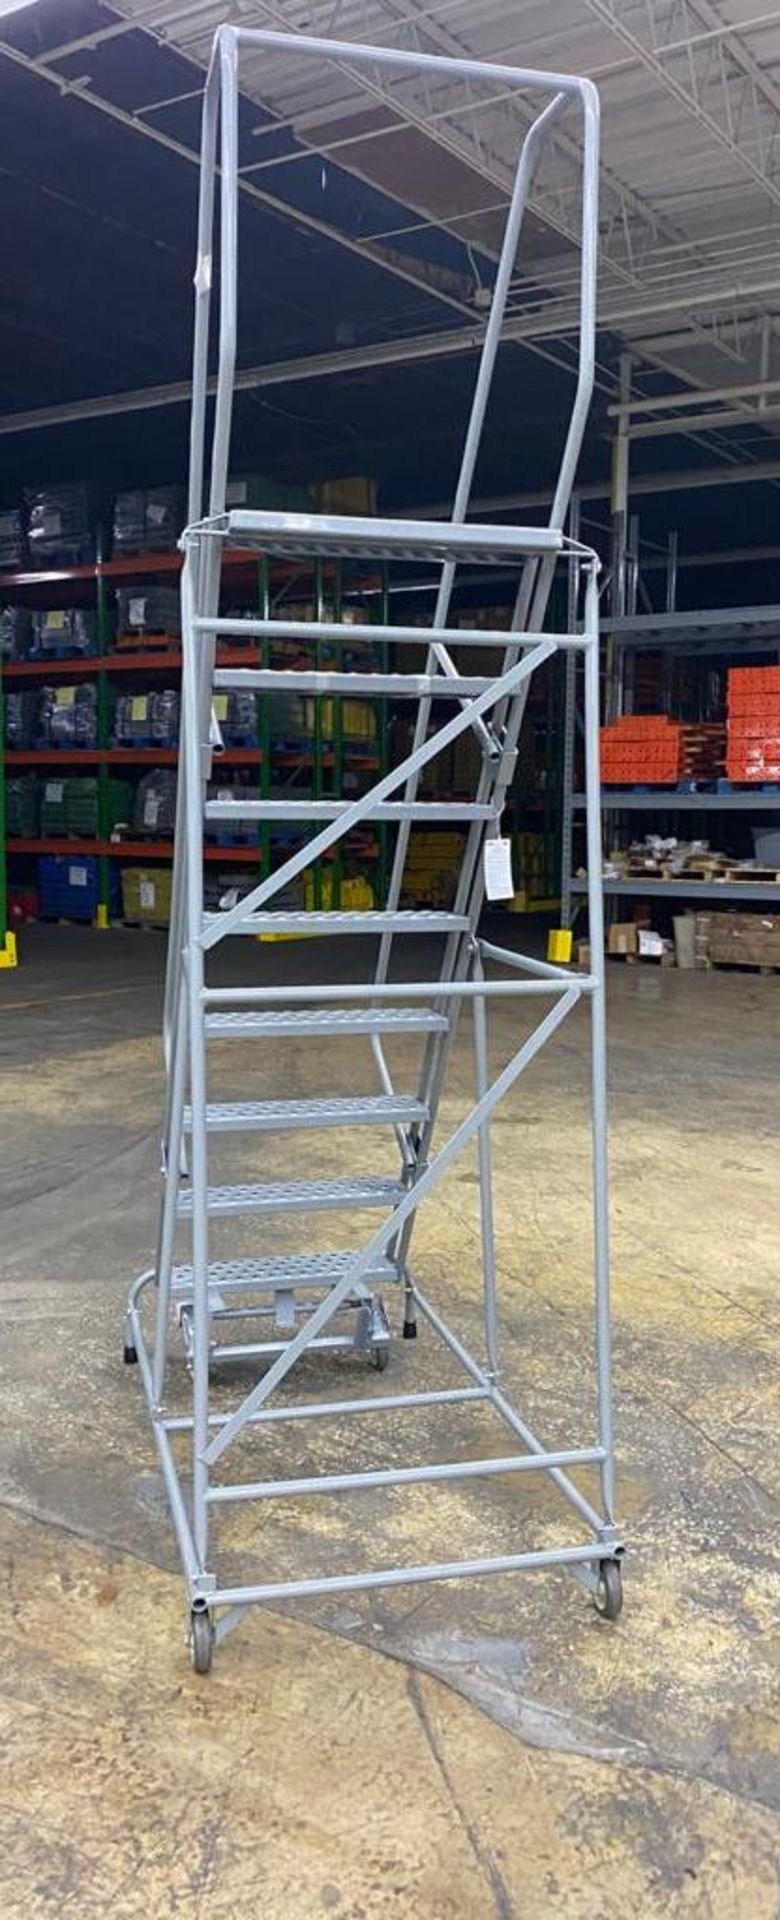 NEW 12 STEP ROLLING LADDER